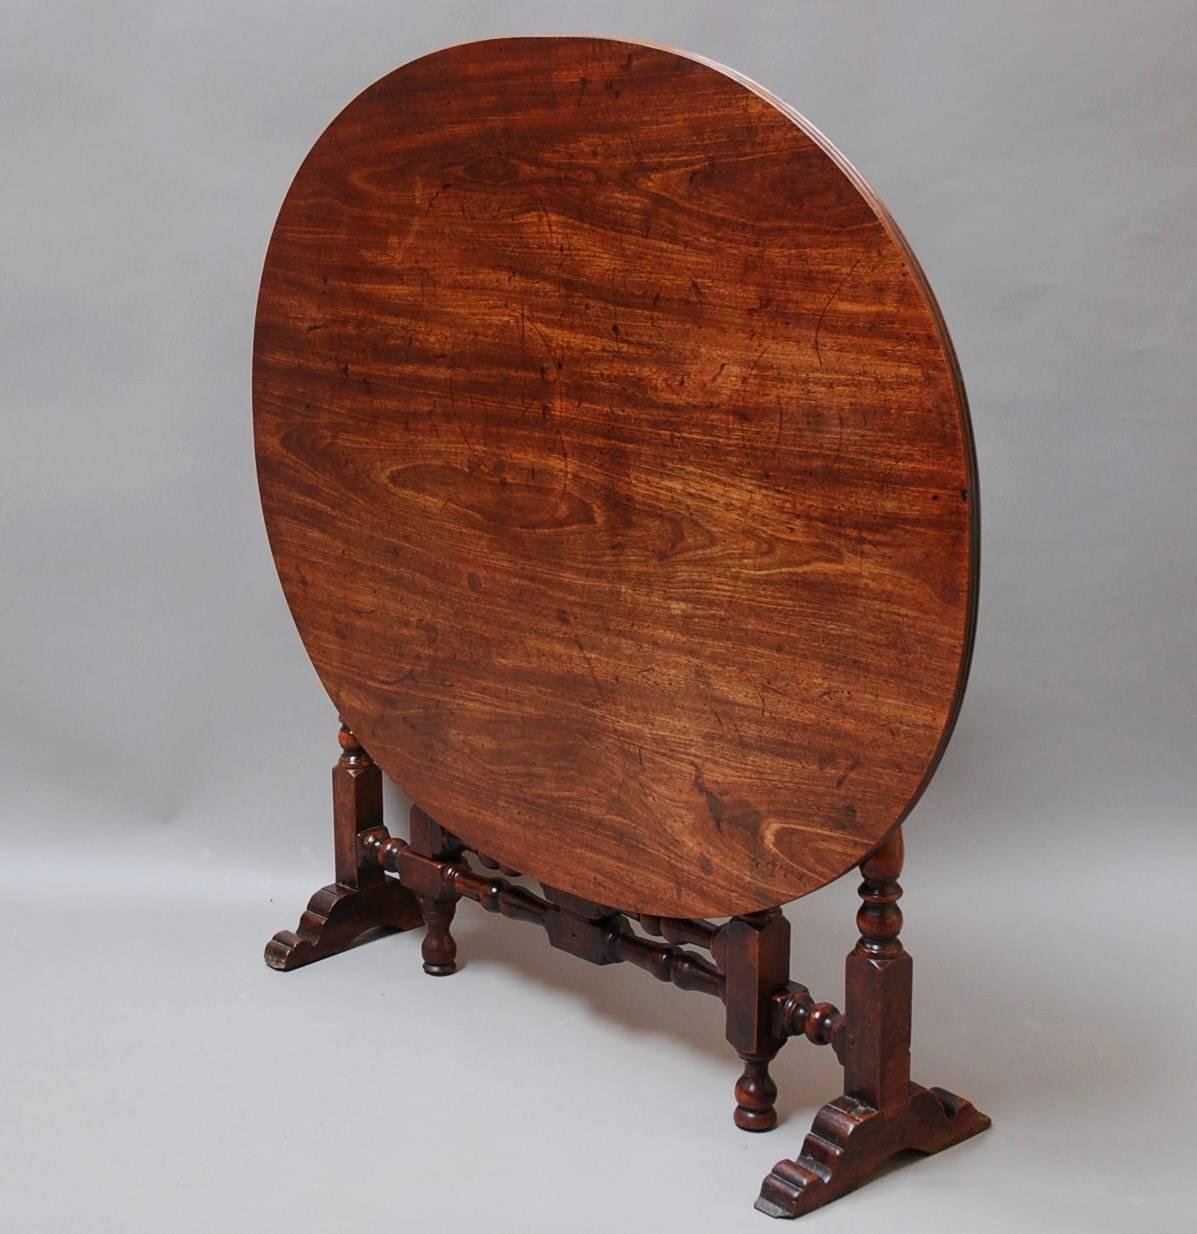 English Rare Late 17th Century Yew Wood Coaching Table with Later Mahogany Top